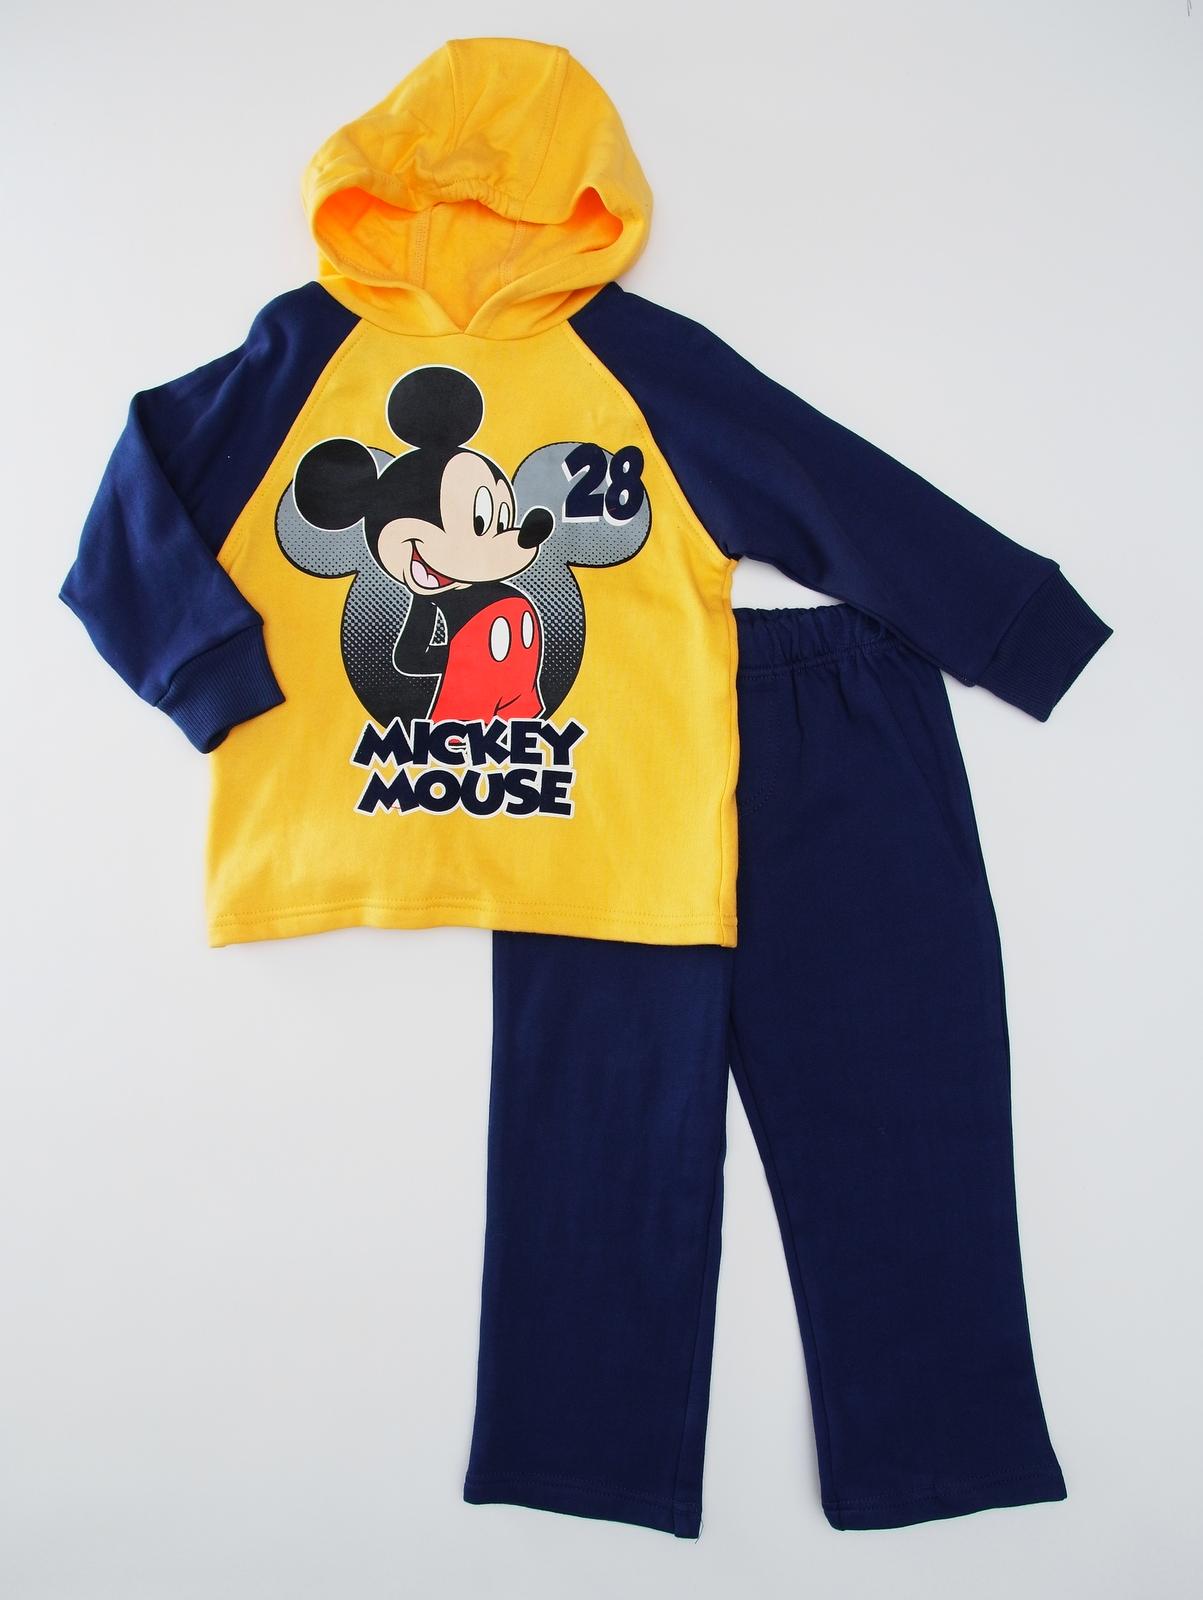 Disney Infant & Toddler Boy's Hoodie & Sweatpants - Mickey Mouse